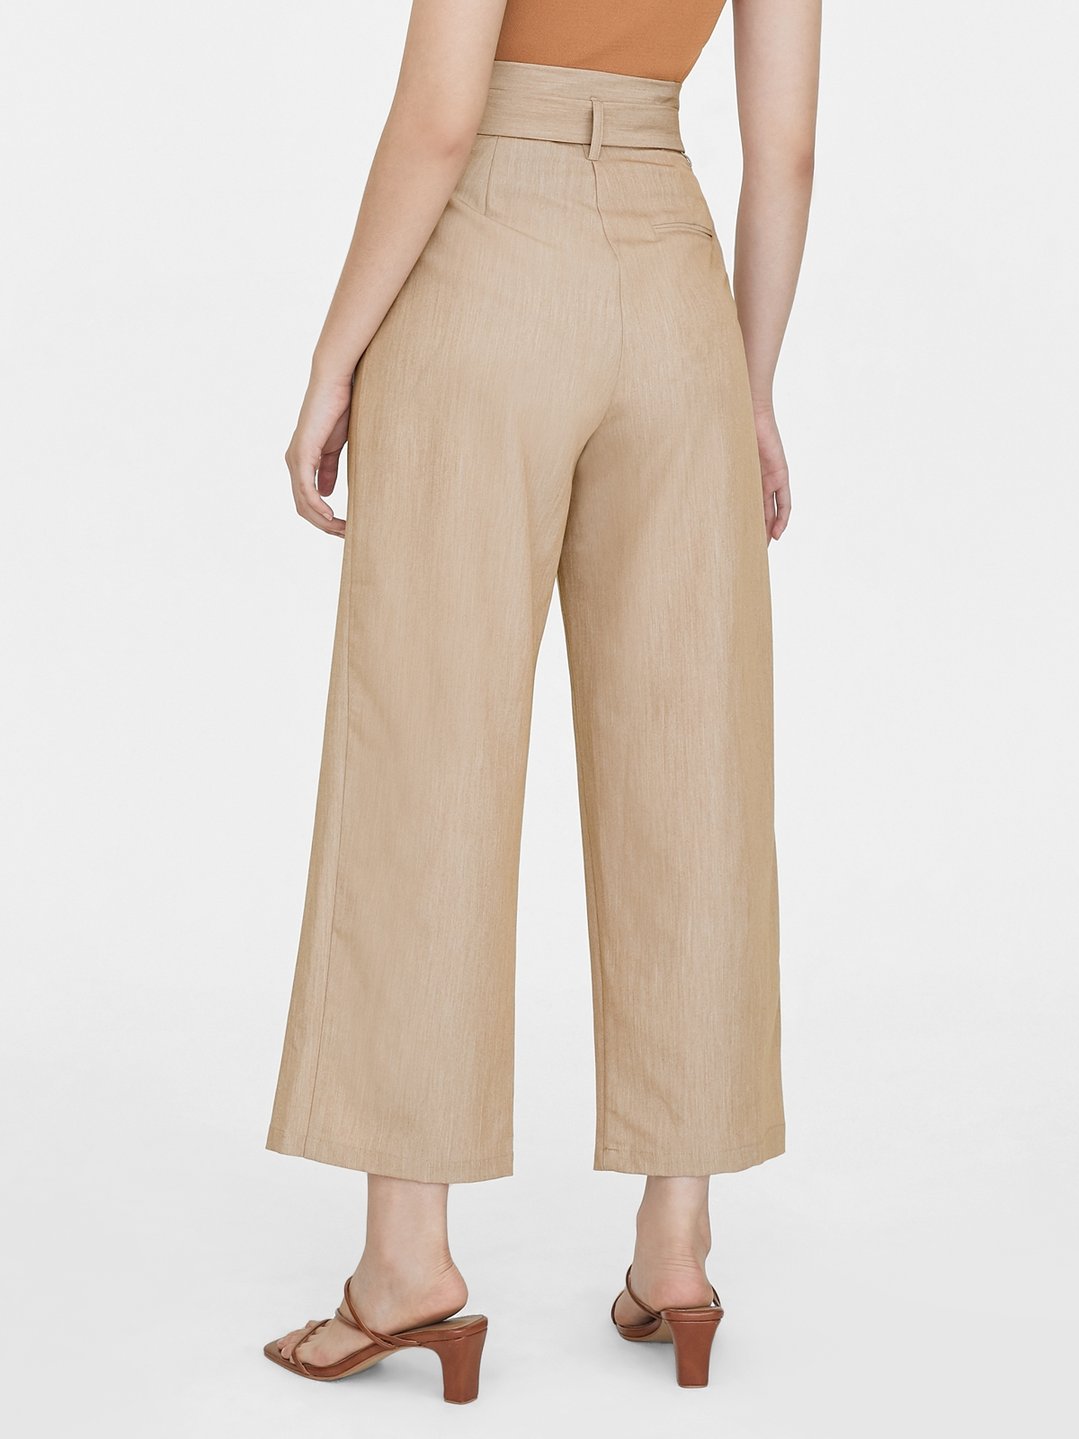 Belted Pants - Peach - Pomelo Fashion